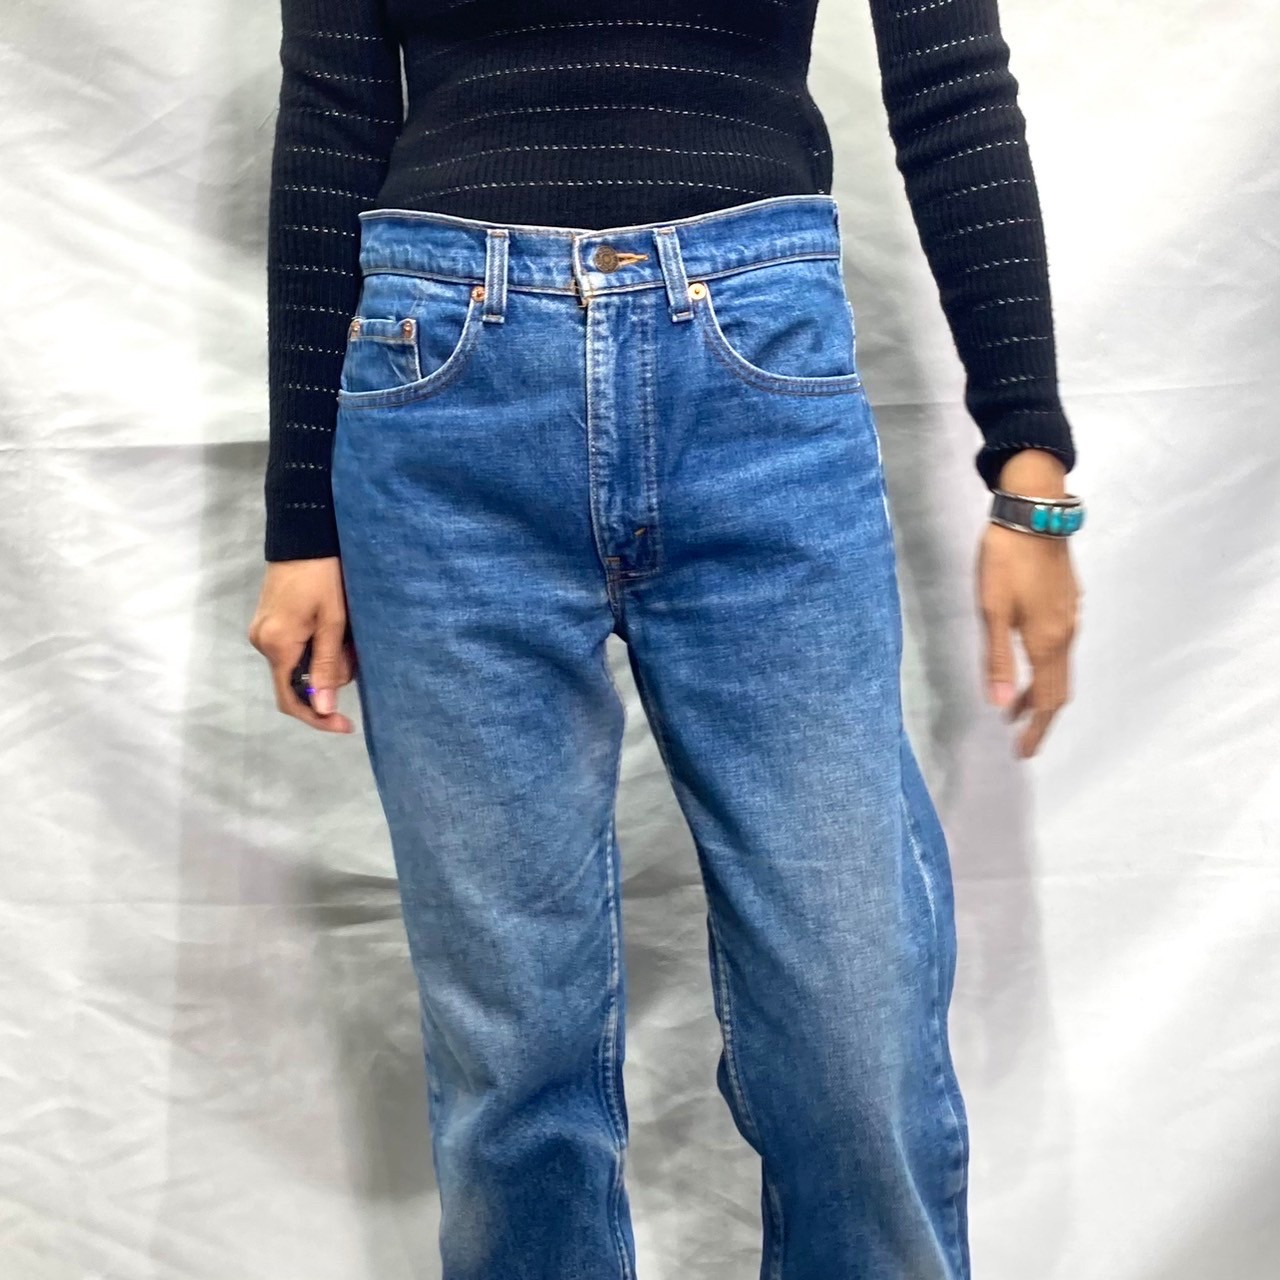 Made in USA Levi's 505 denim pants